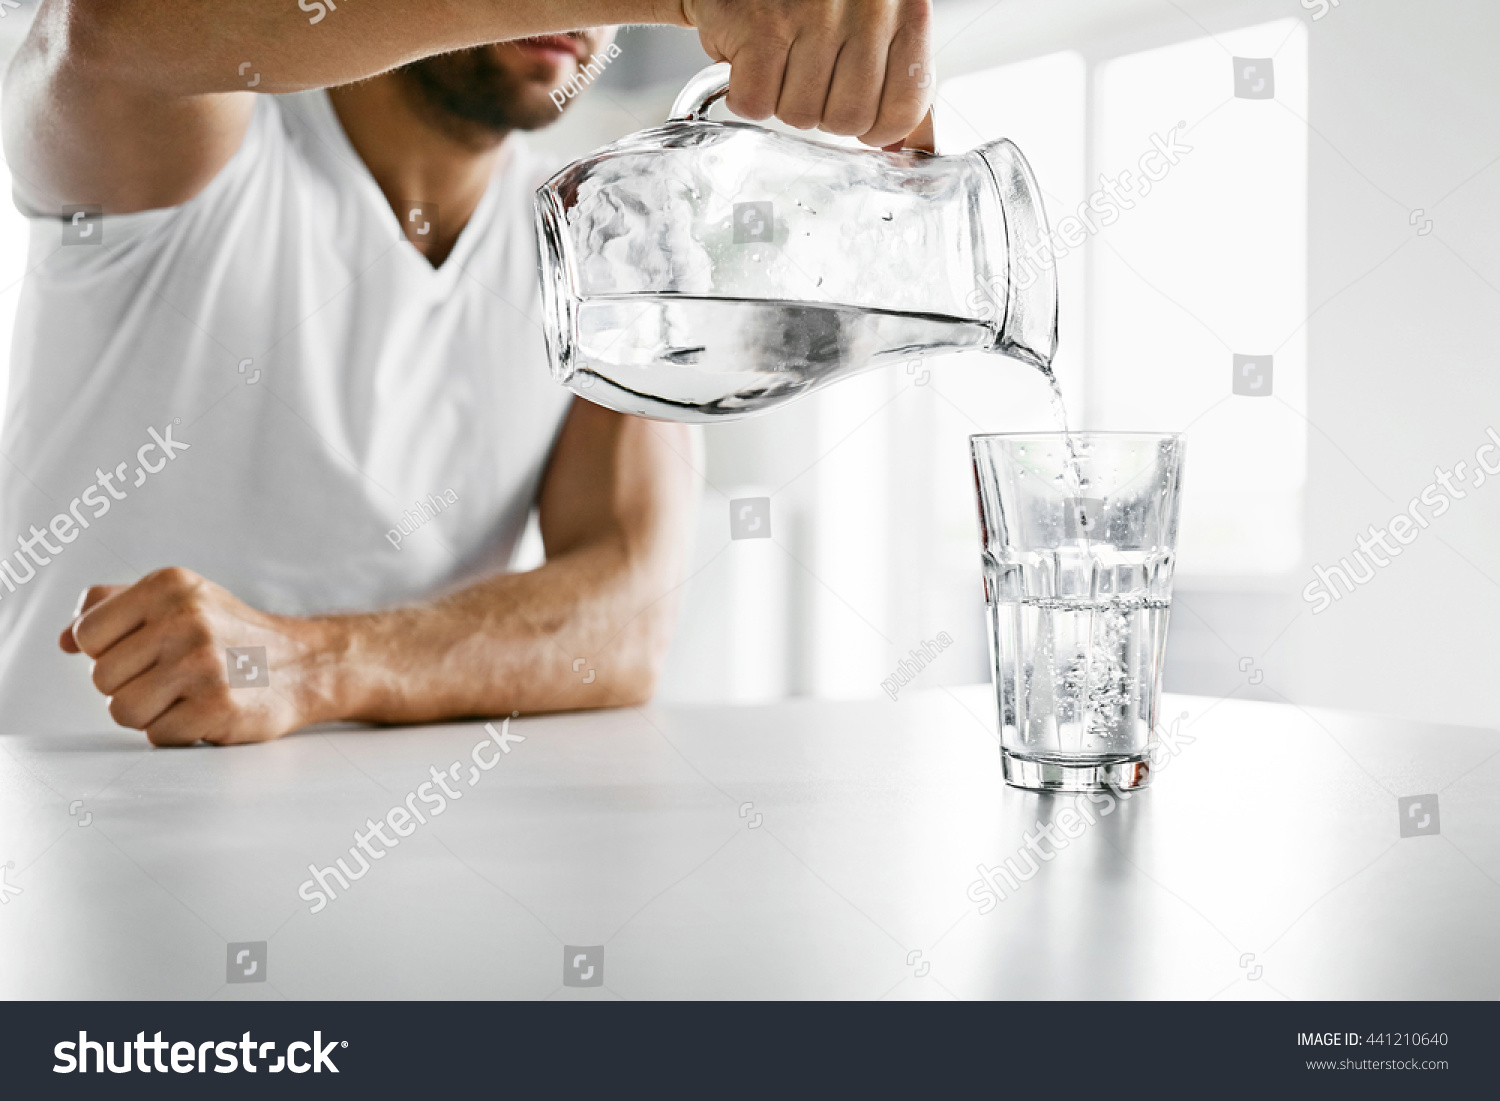 Drink Water. Close Up Of Handsome Young Man Pouring Fresh Pure Water From Pitcher Into A Glass In Morning In Kitchen. Beautiful Athletic Male Model Feeling Thirsty. Healthy Nutrition And Hydration #441210640